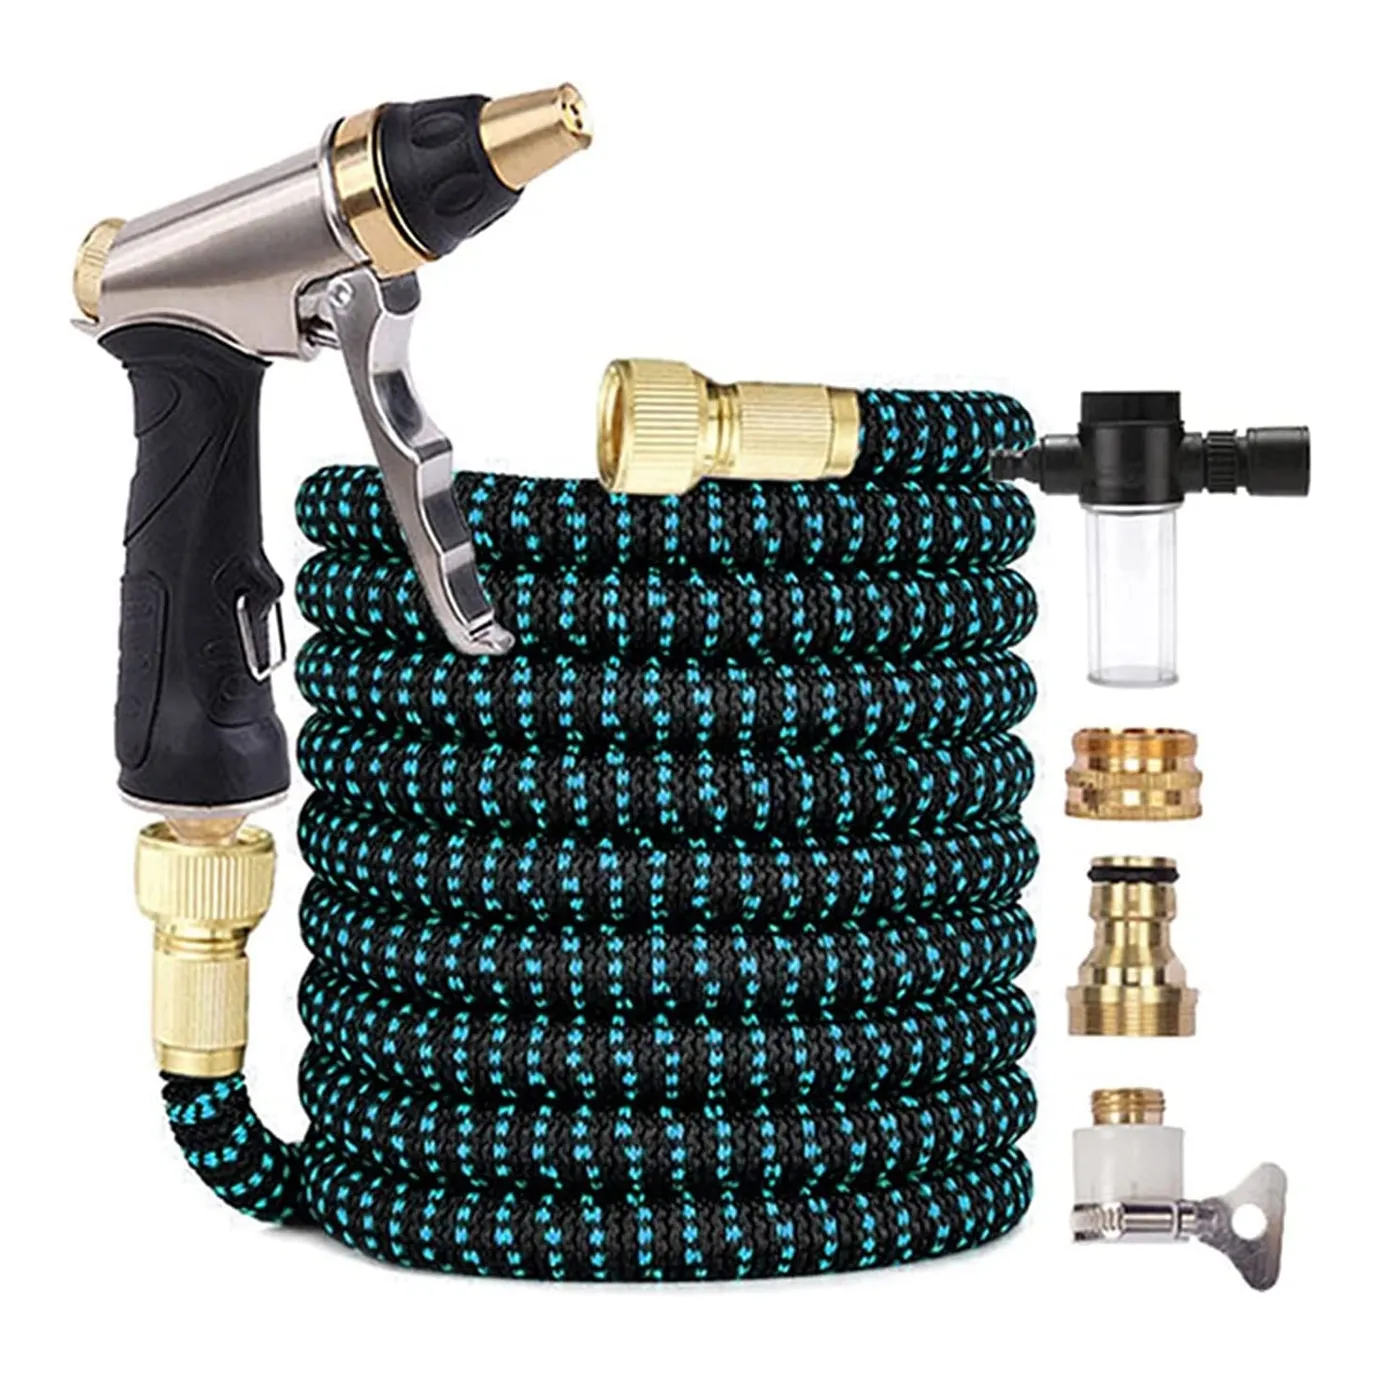 Adjustable Flexible Home Garden Watering Hose Pip Expandable Magic Garden Hose With Metal Spraying Nozzle for Car Washing